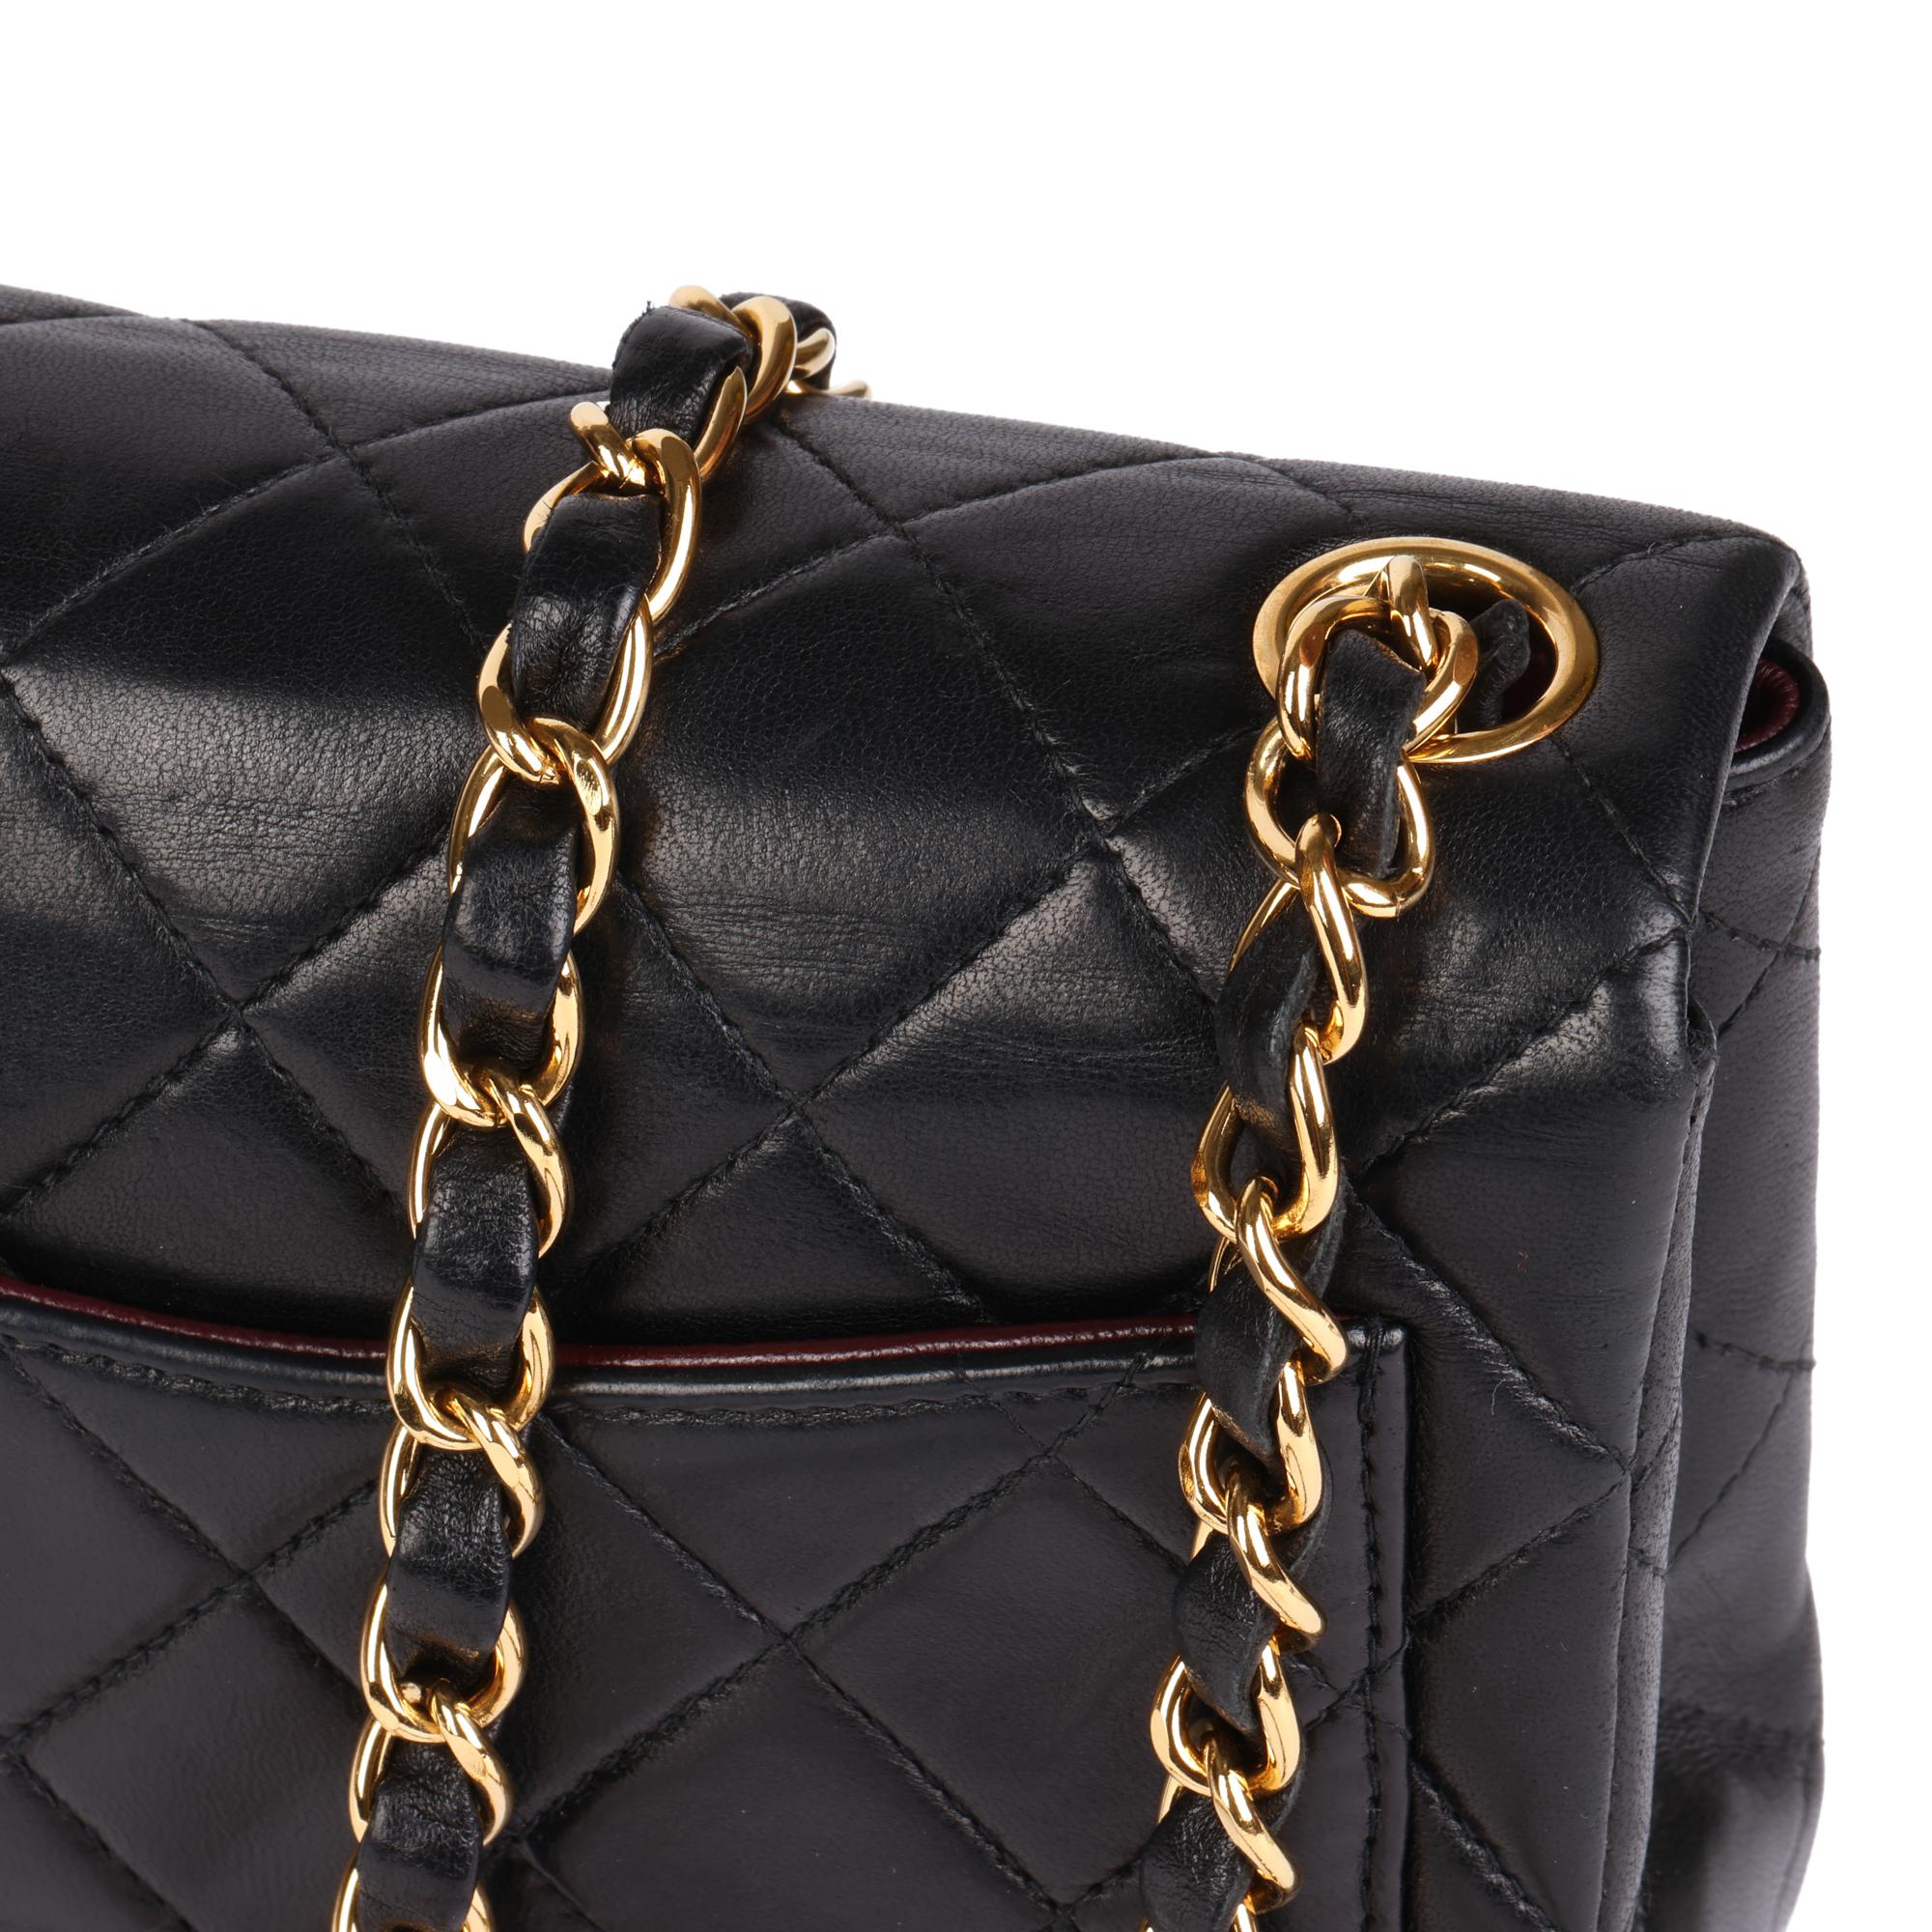 CHANEL Black Quilted Lambskin Vintage Square Mini Flap Bag 1